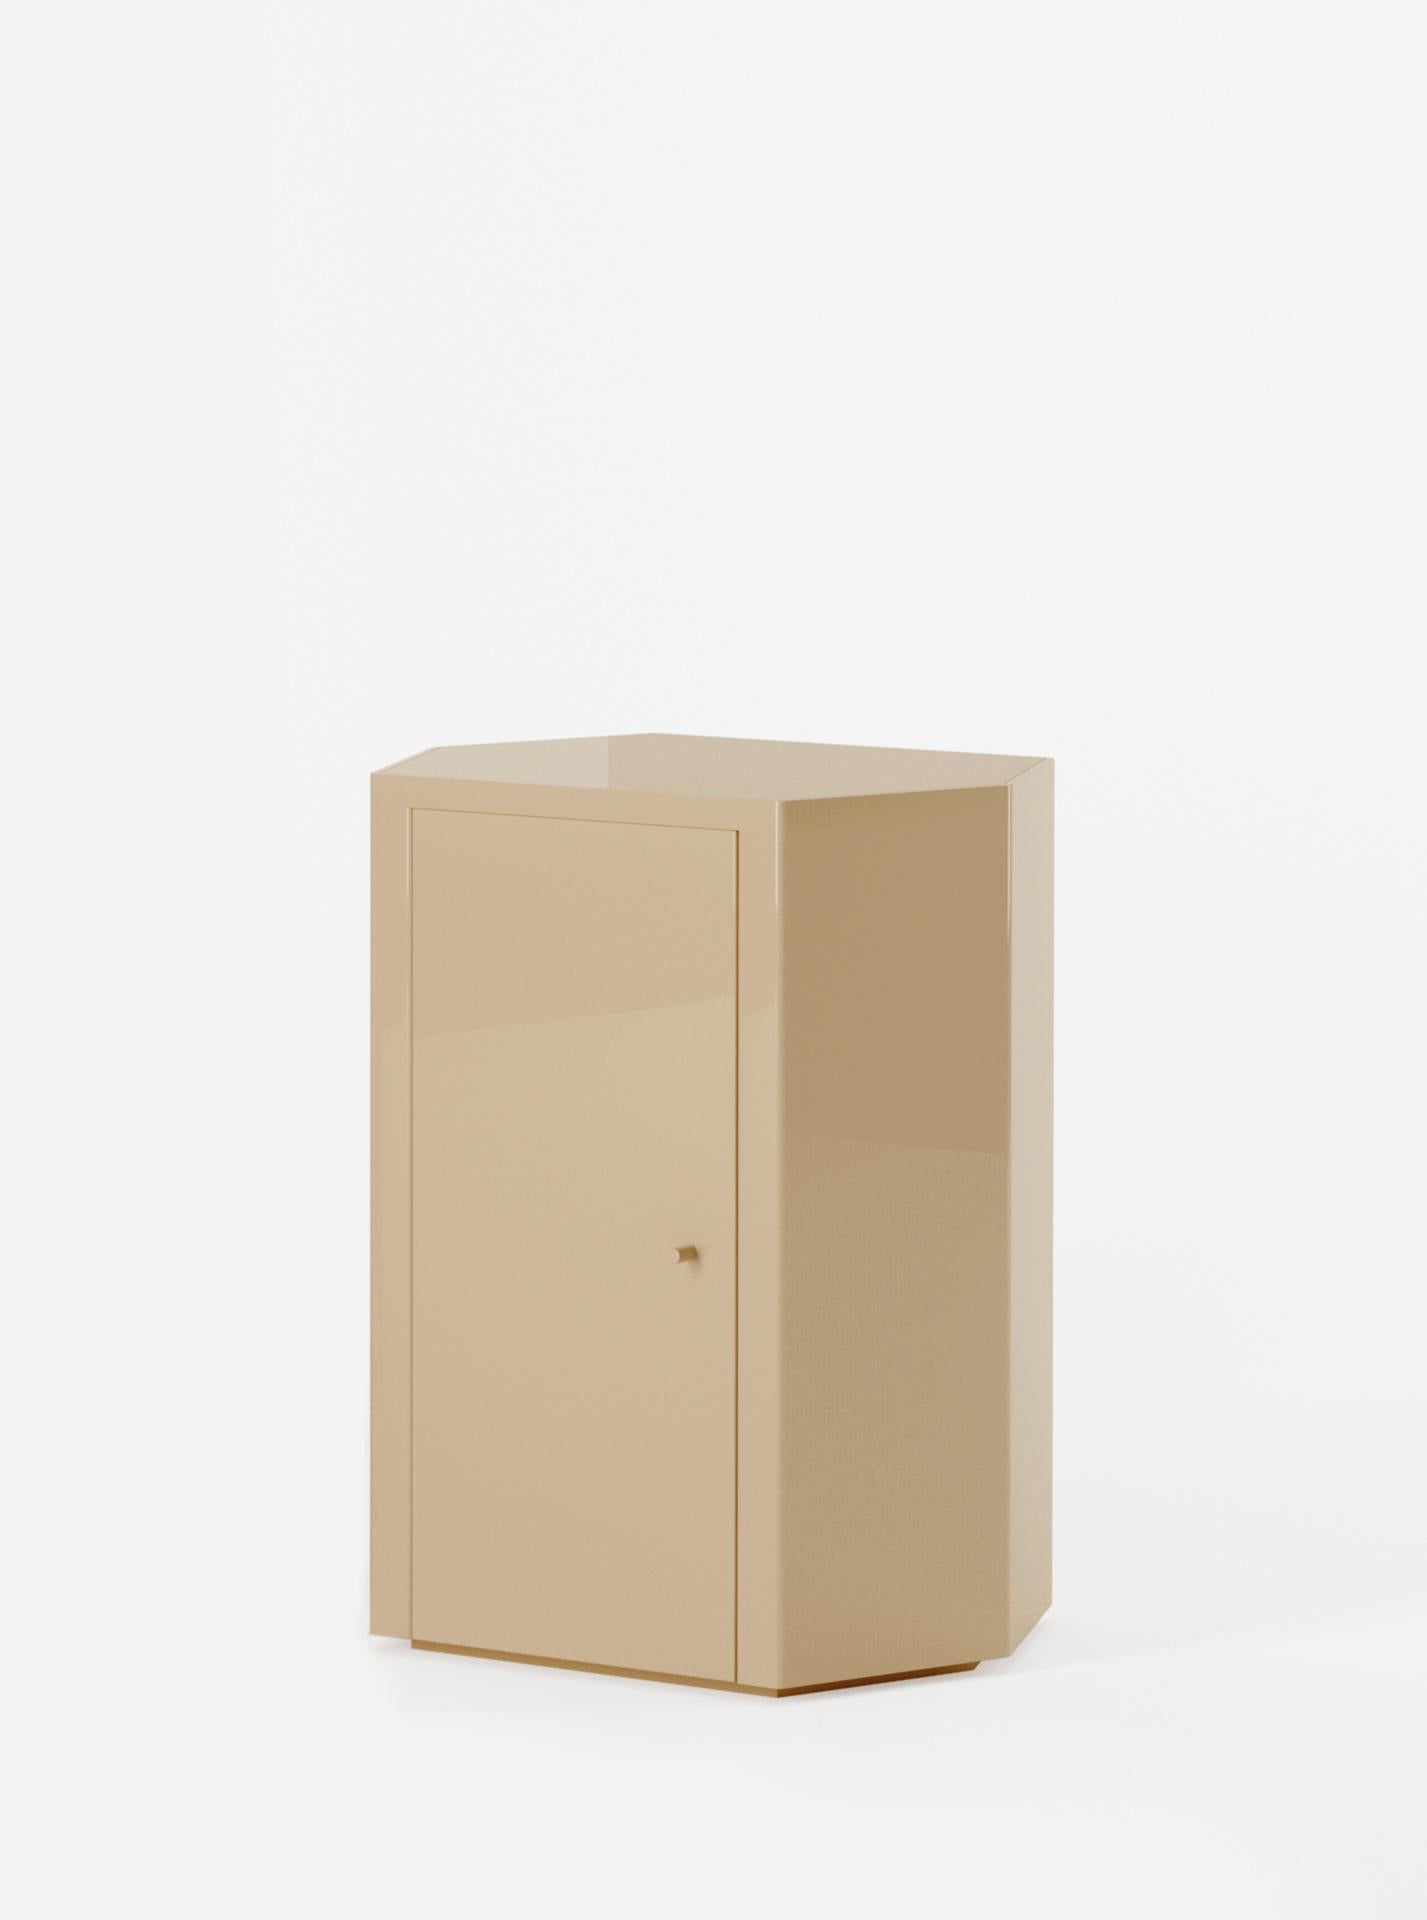 South African Pair of Park Night Stands in Sand Beige Lacquer by Yaniv Chen for Lemon For Sale